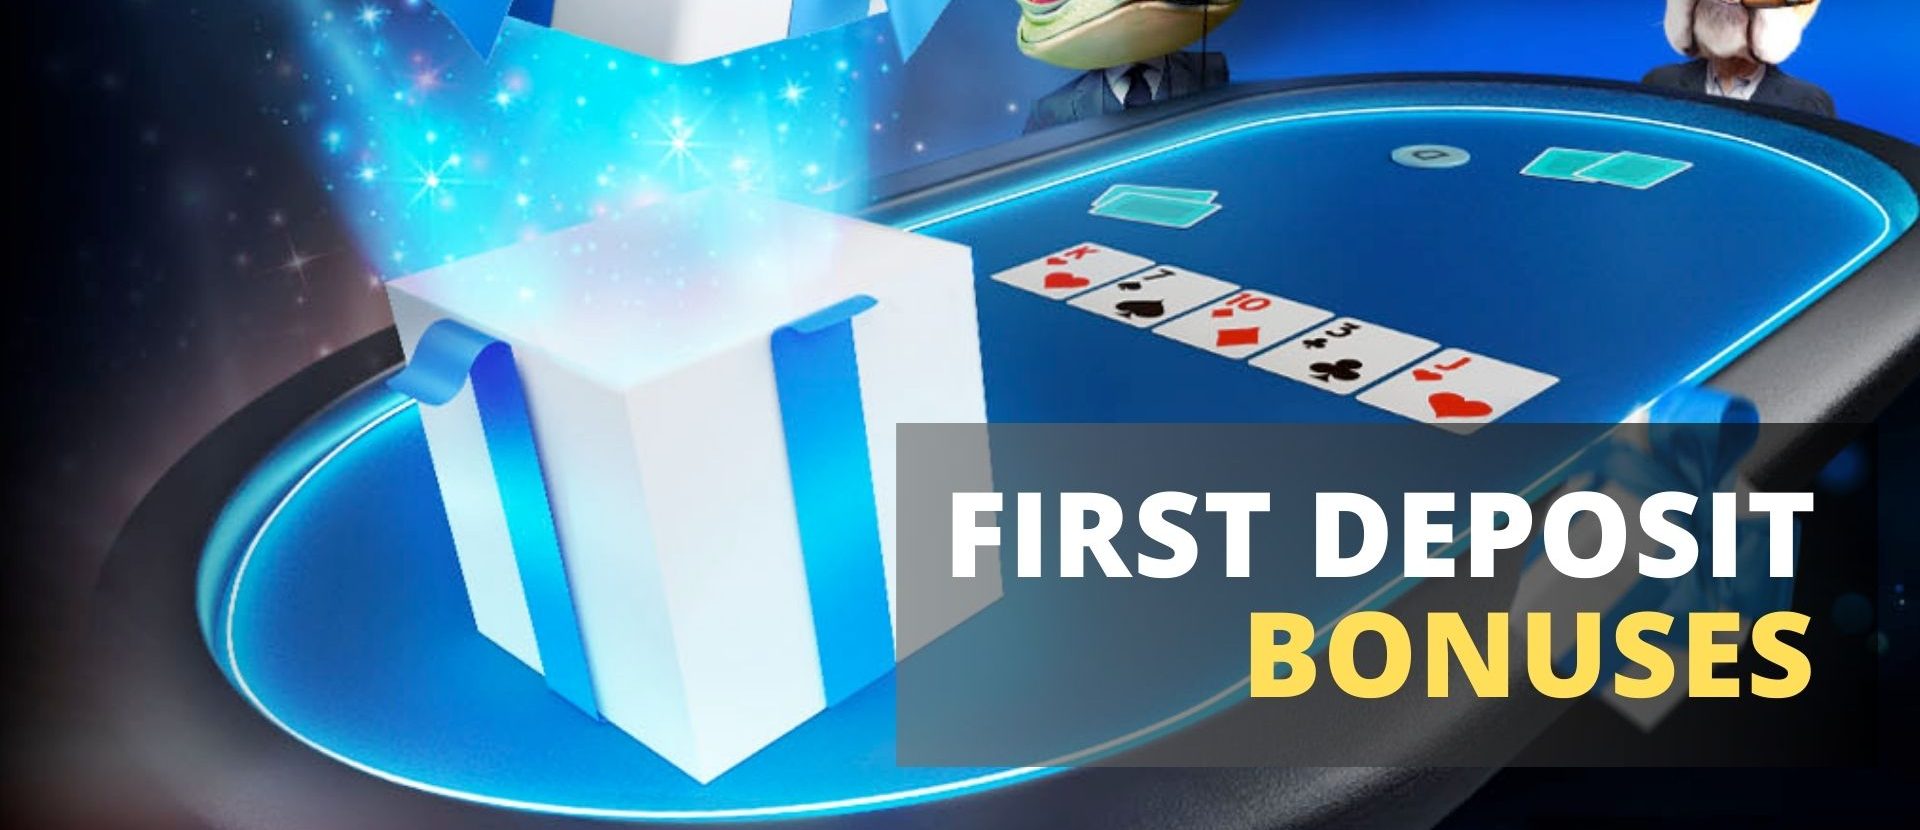 First Deposit Bonuses - Manual for Punters from US 